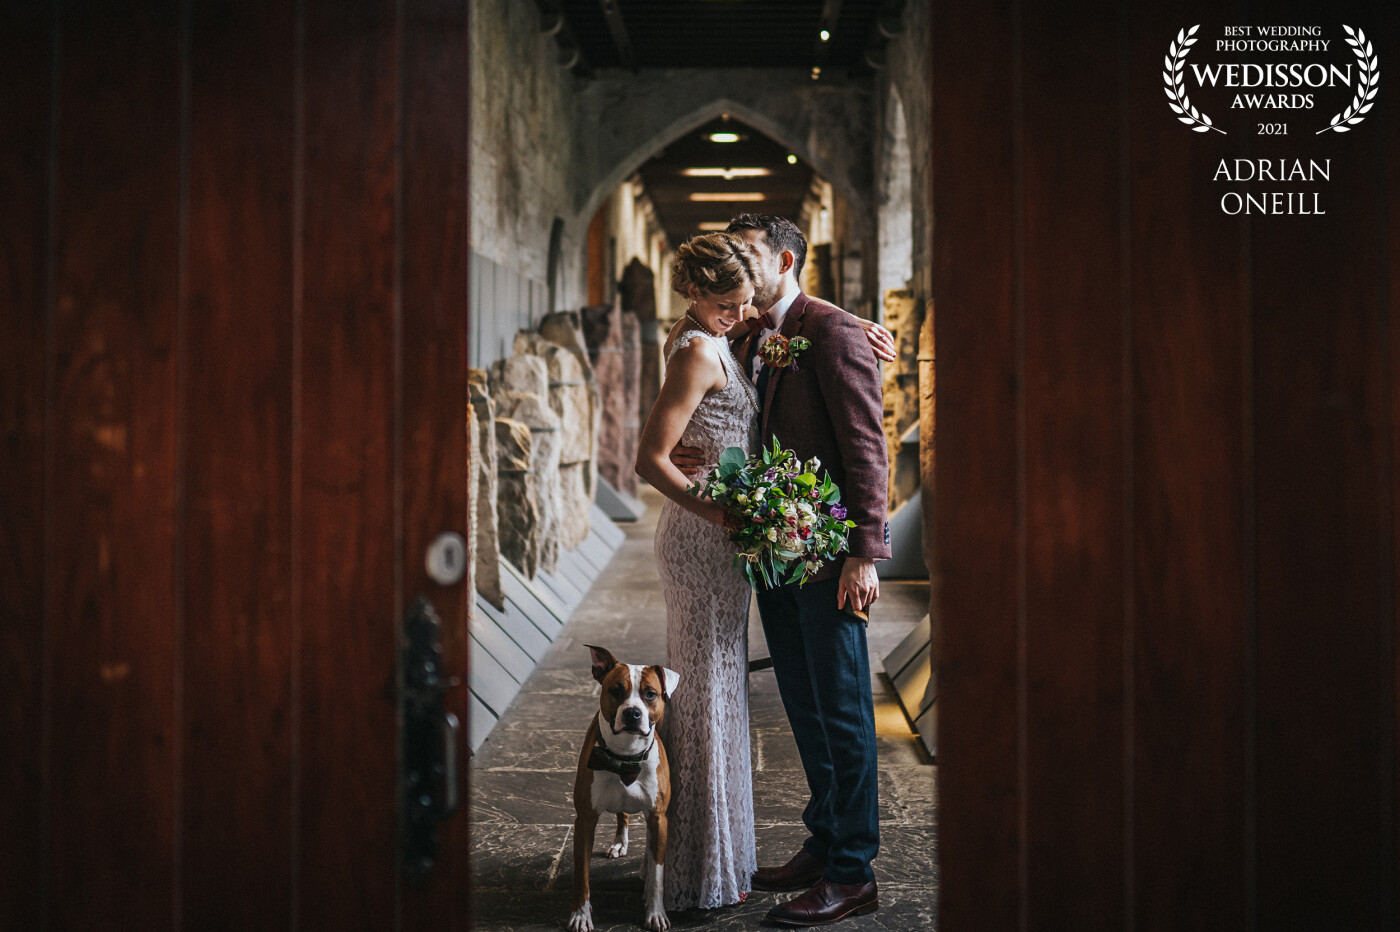 This couple studied and now work at this University and decided to have some of their wedding images shot there. Their dog was so beautiful and curious...a fantastic wedding through this Covid climate 